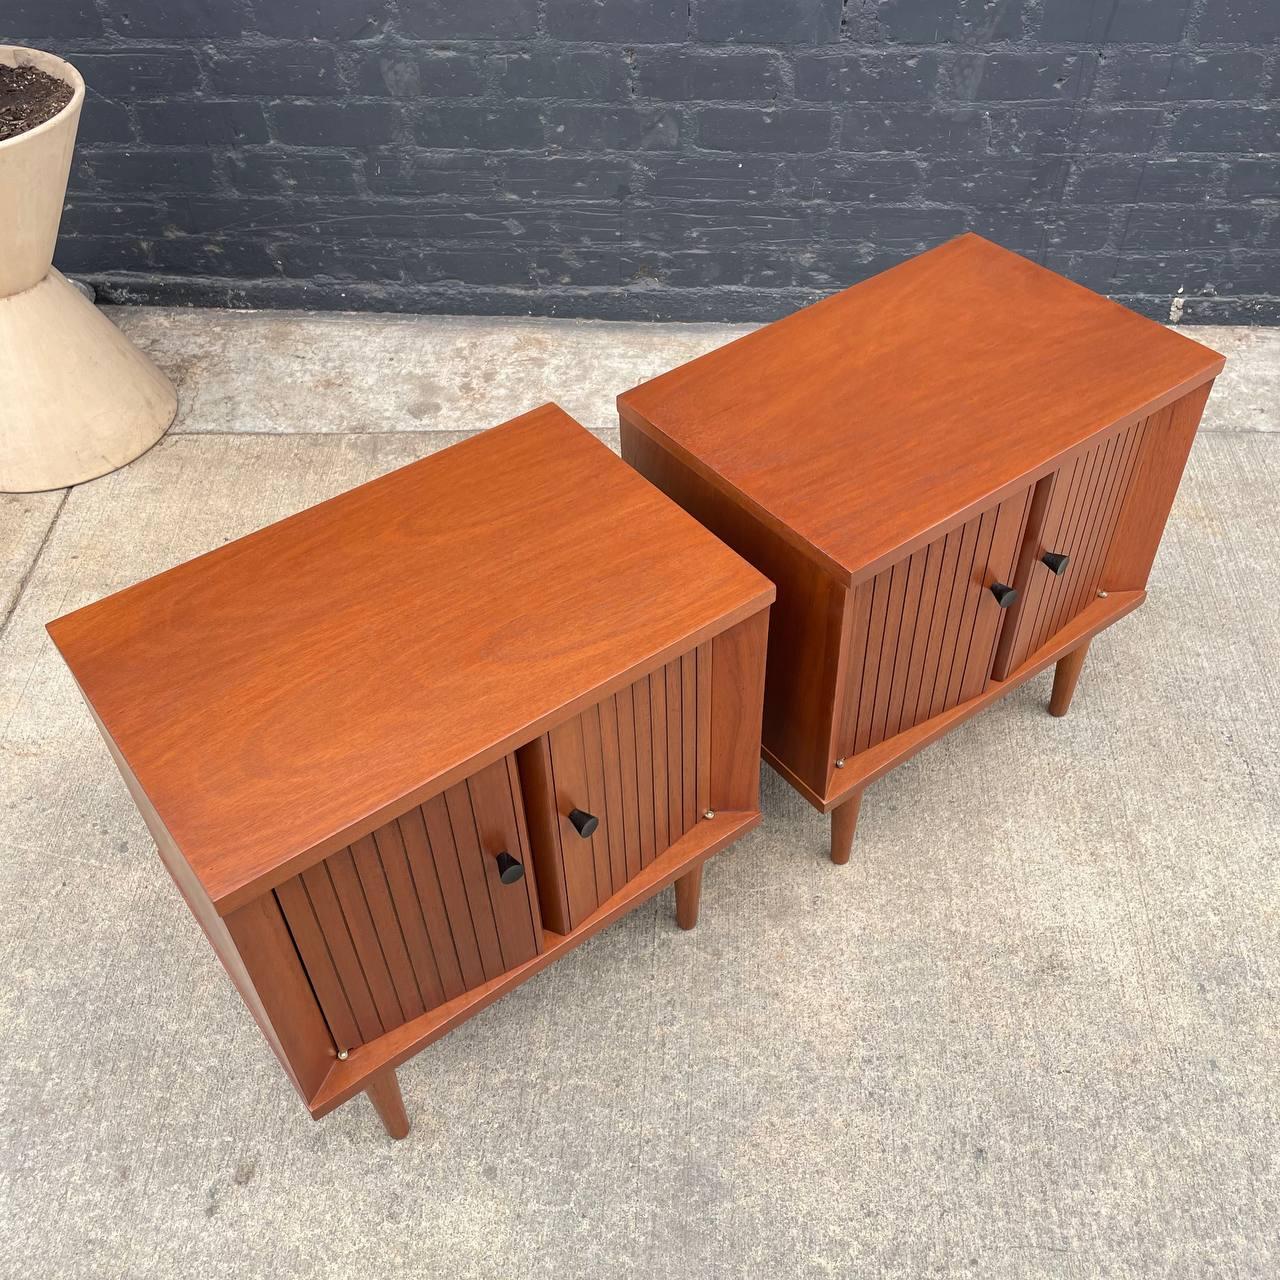 Newly Refinished - Pair of Mid-Century Modern Walnut Night Stands by Basic-Witz 2